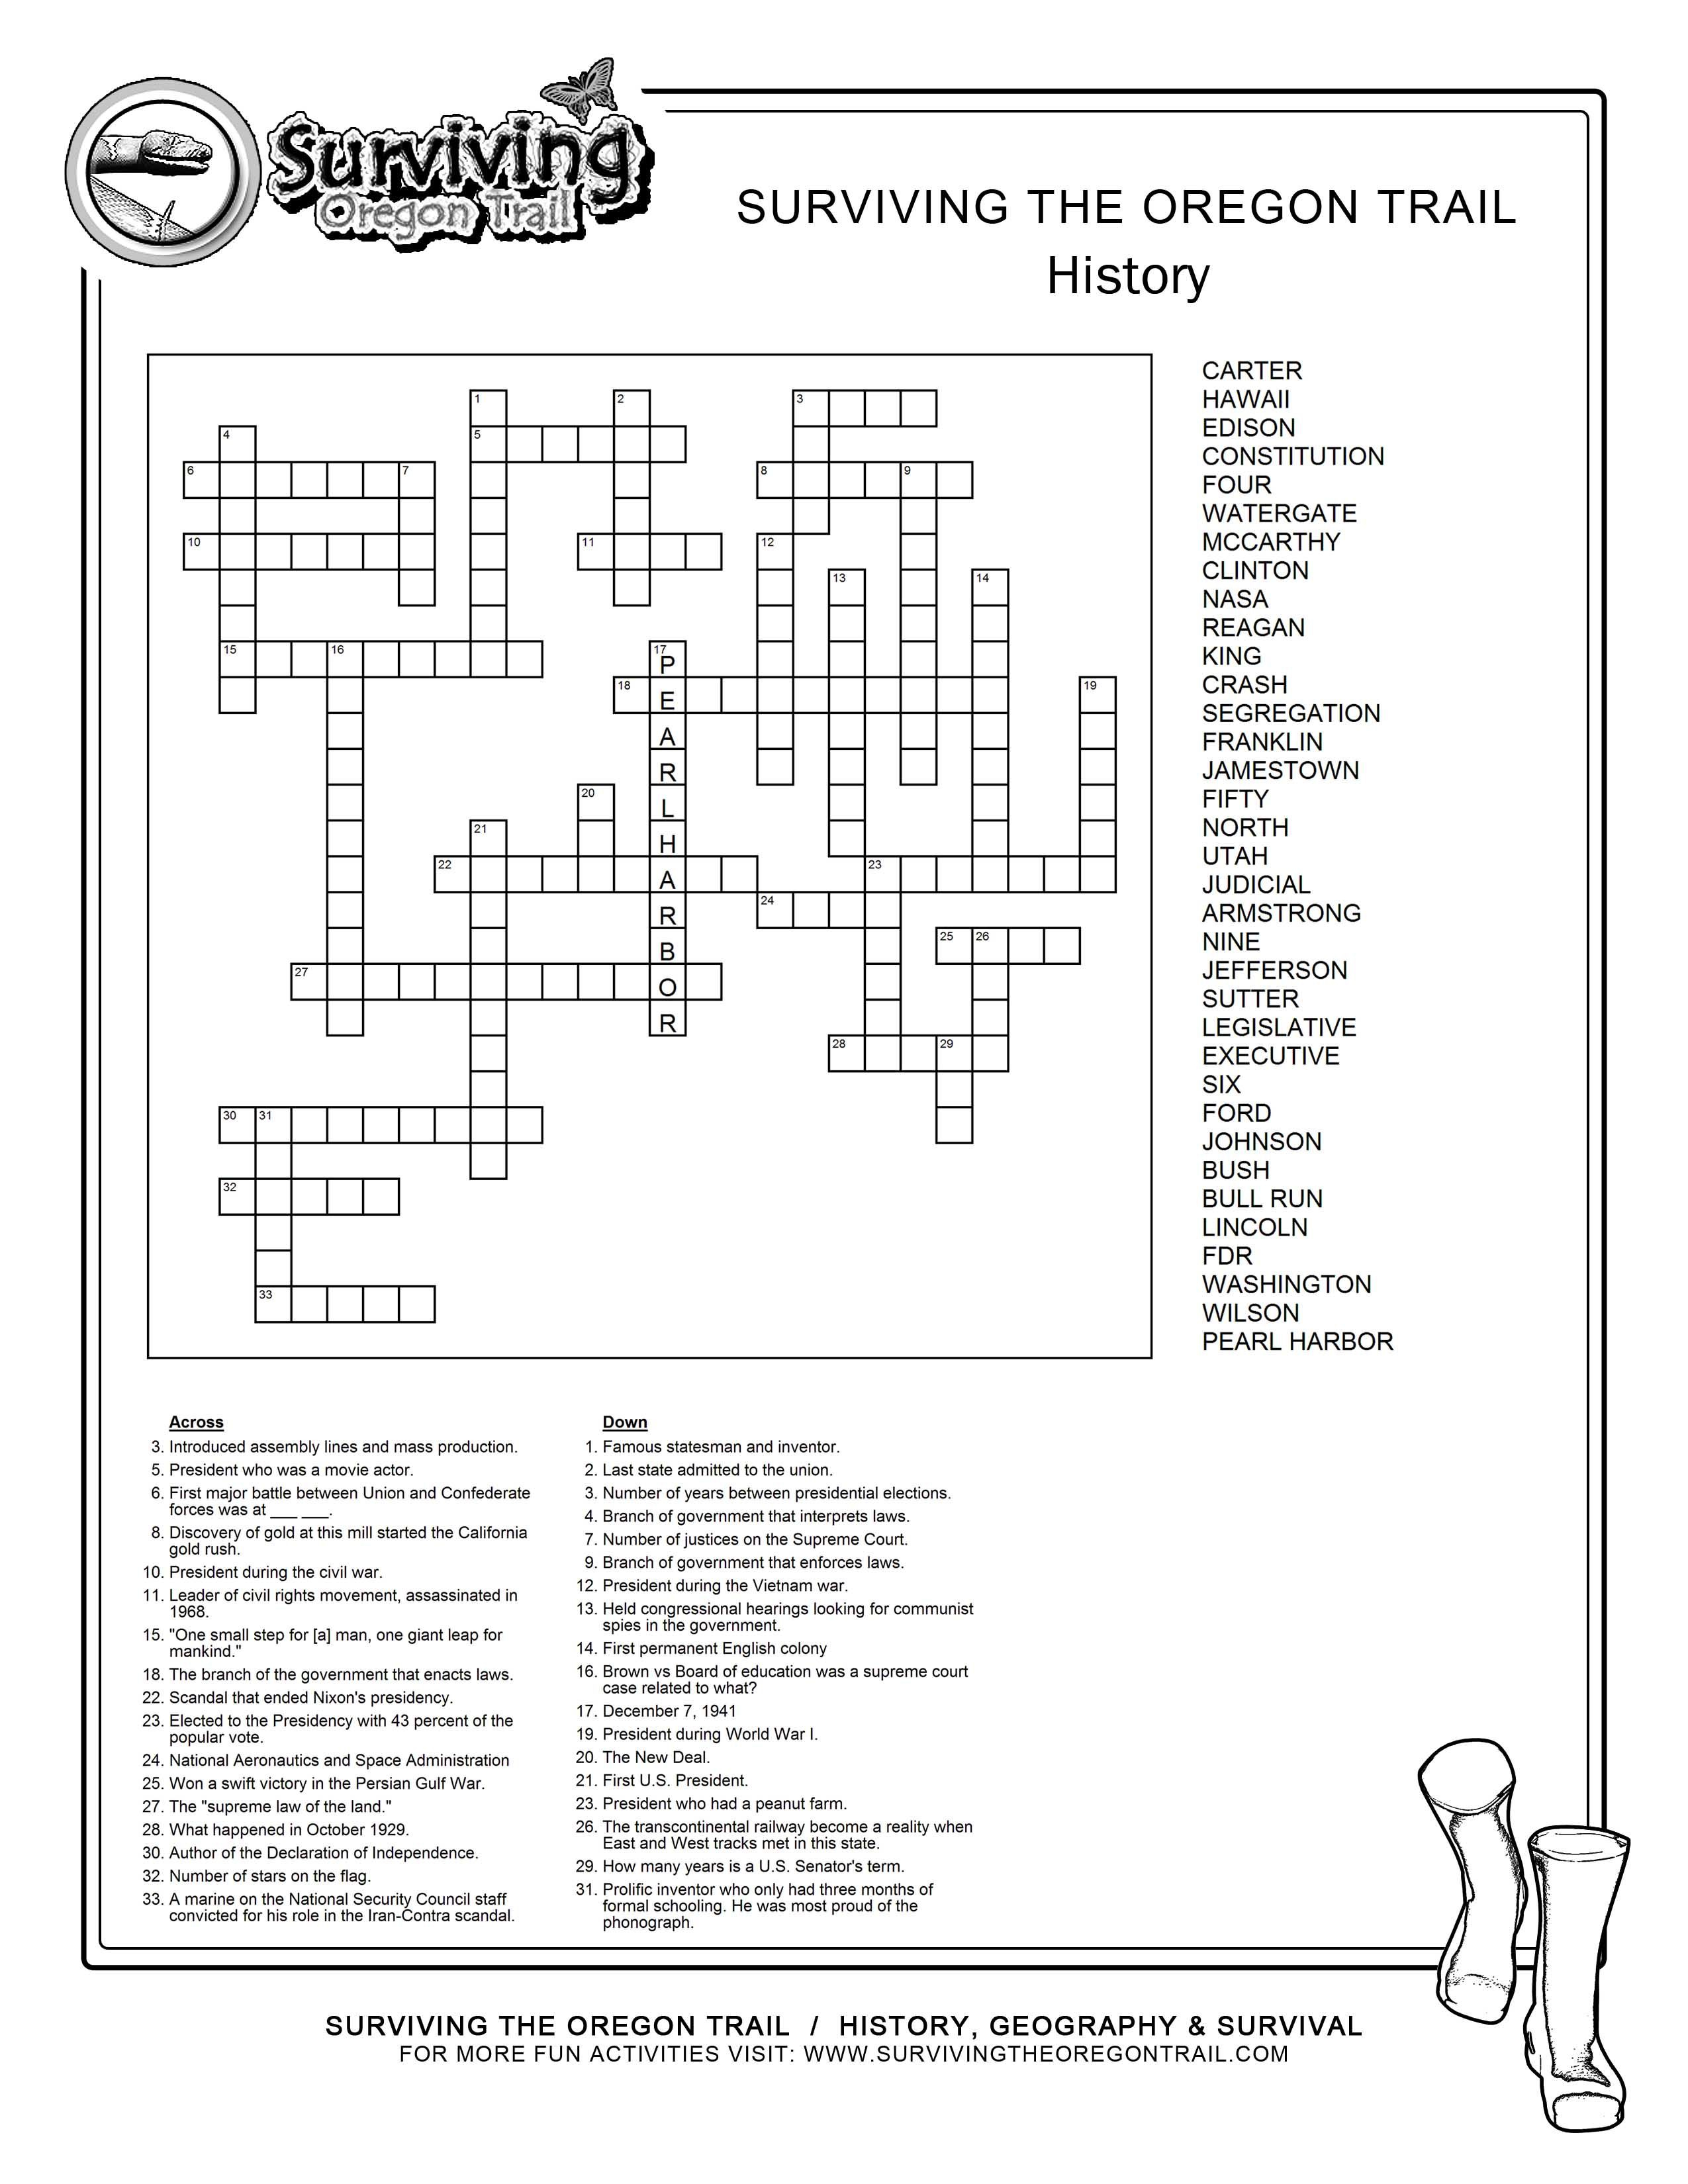 Fill Free To Save This Historical Crossword Puzzle To Your Computer - Printable History Crossword